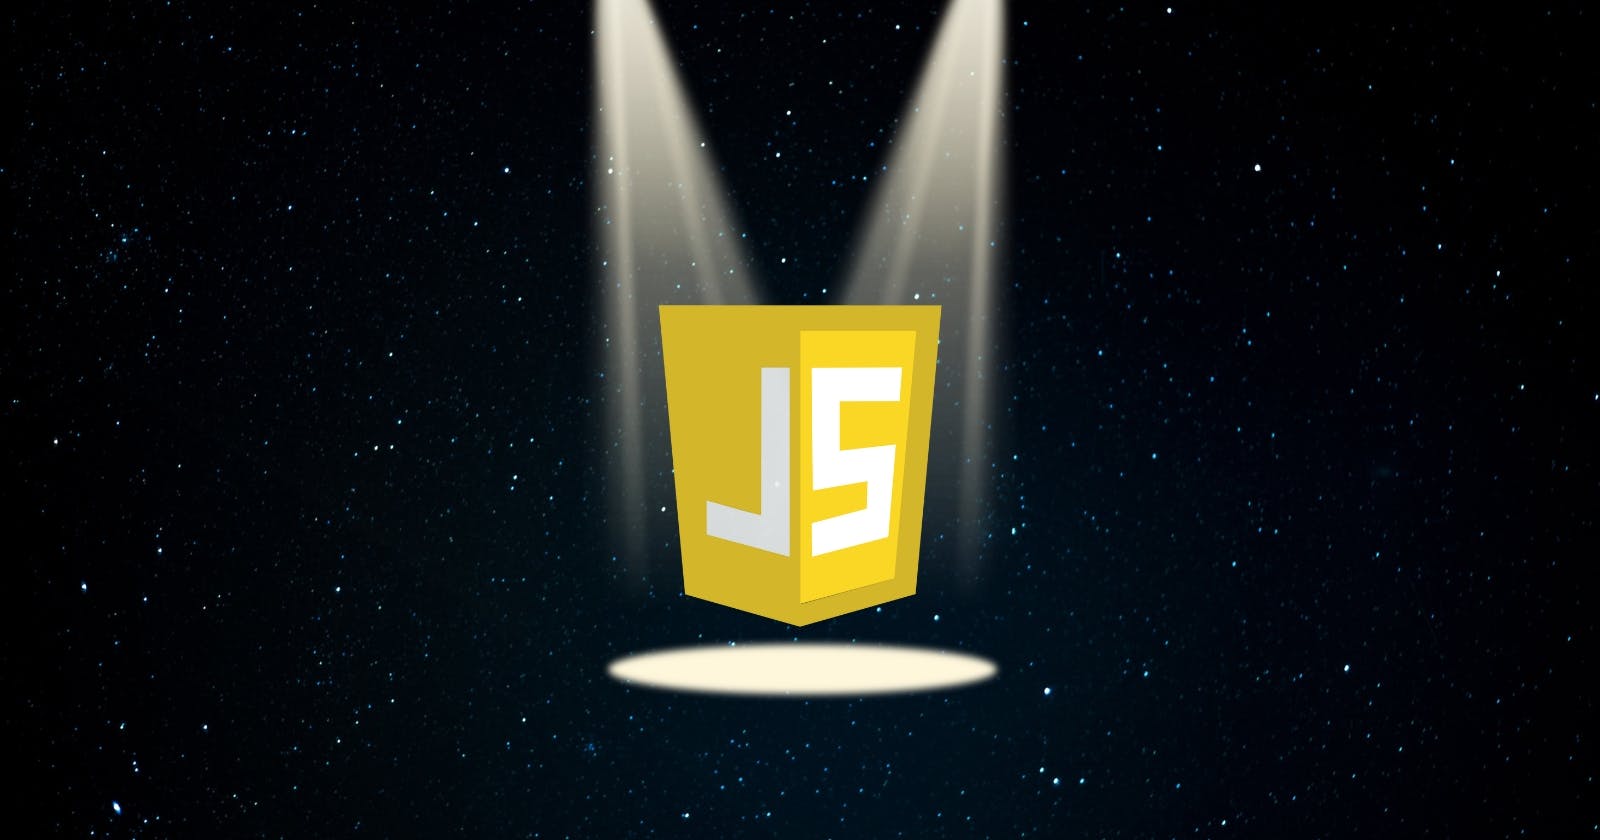 Why JavaScript Is My One and Only: A Senior Developer's Perspective